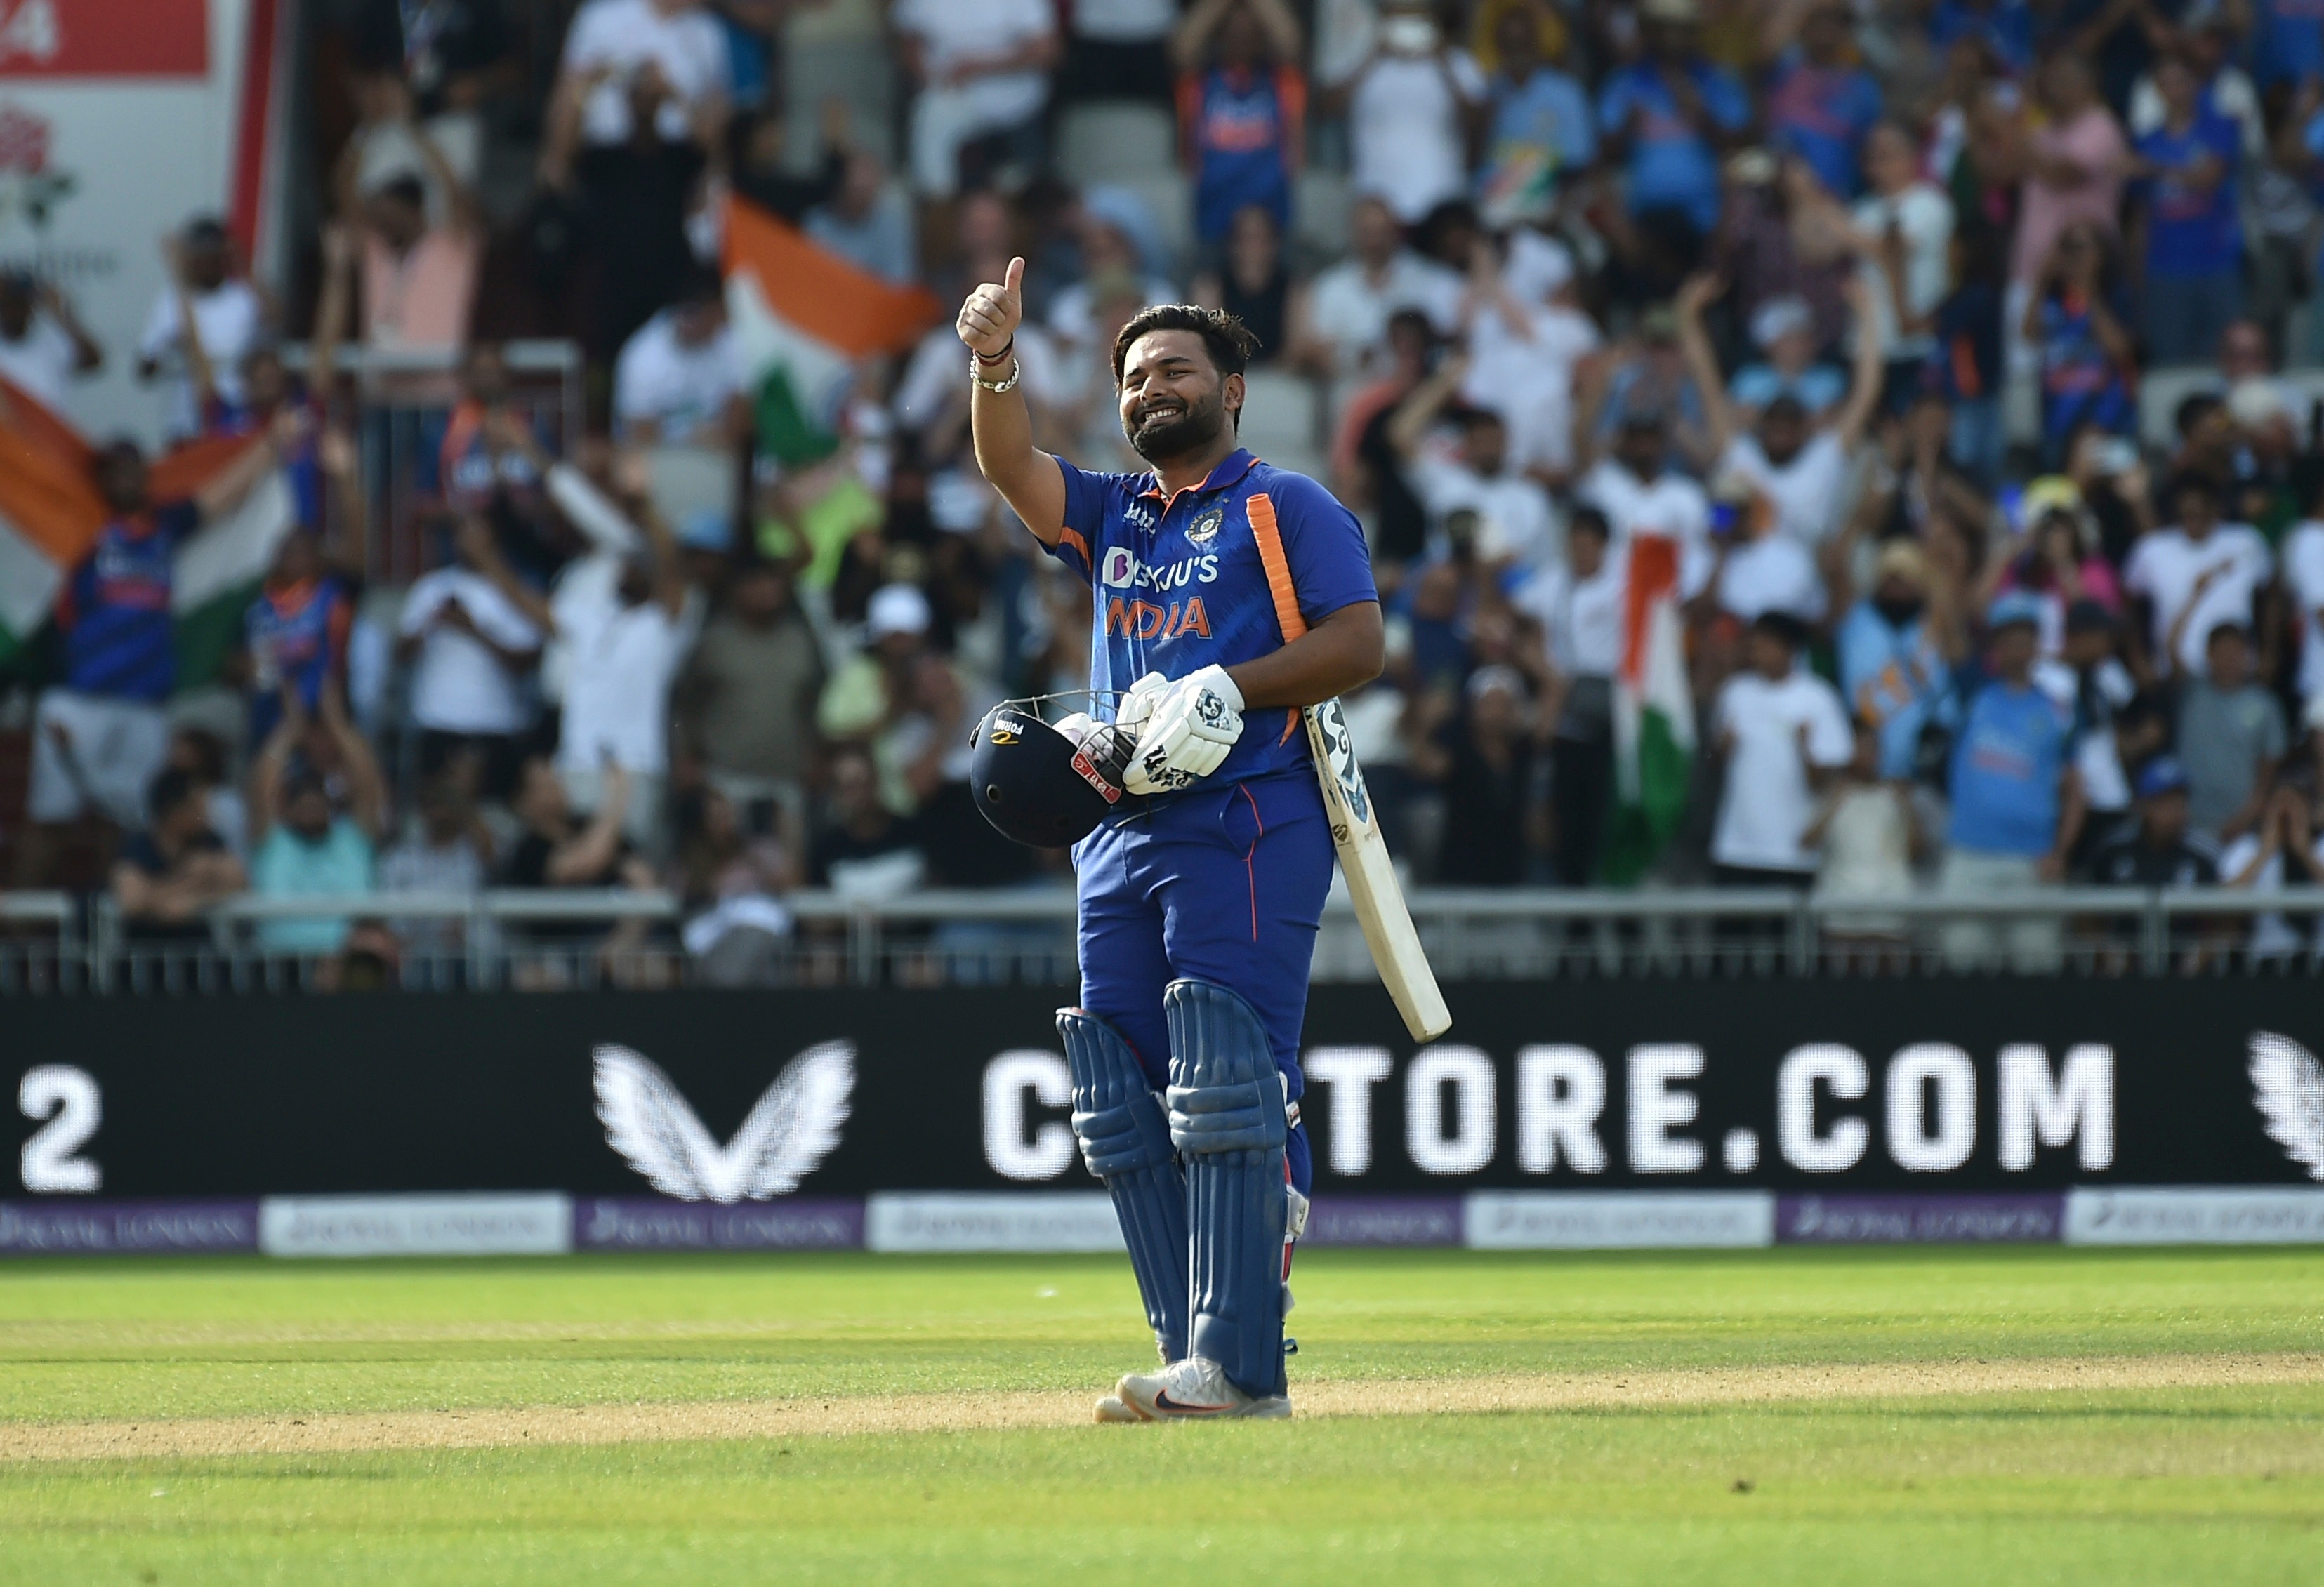 India vs England 3rd ODI Highlights: Pant's maiden century gives IND series  win